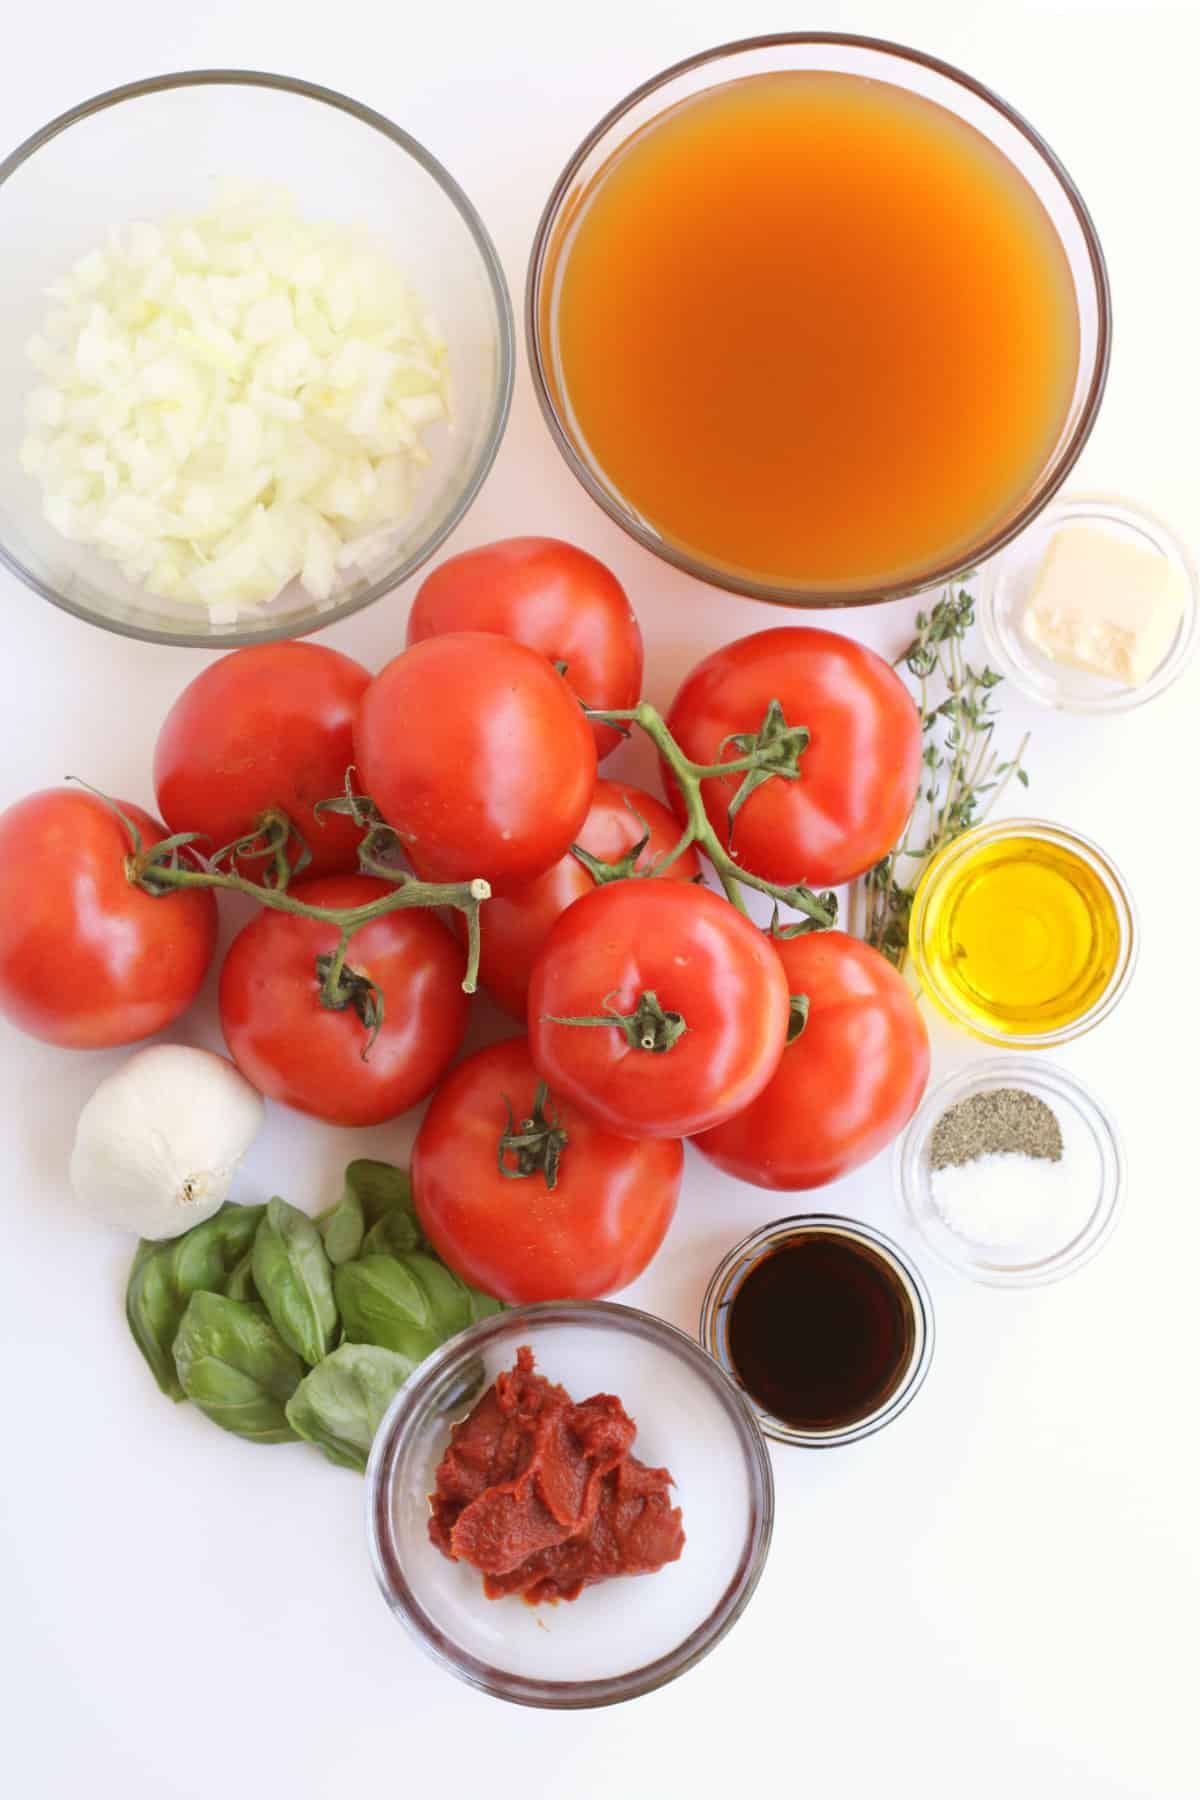 ingredients for making roasted tomato soup.